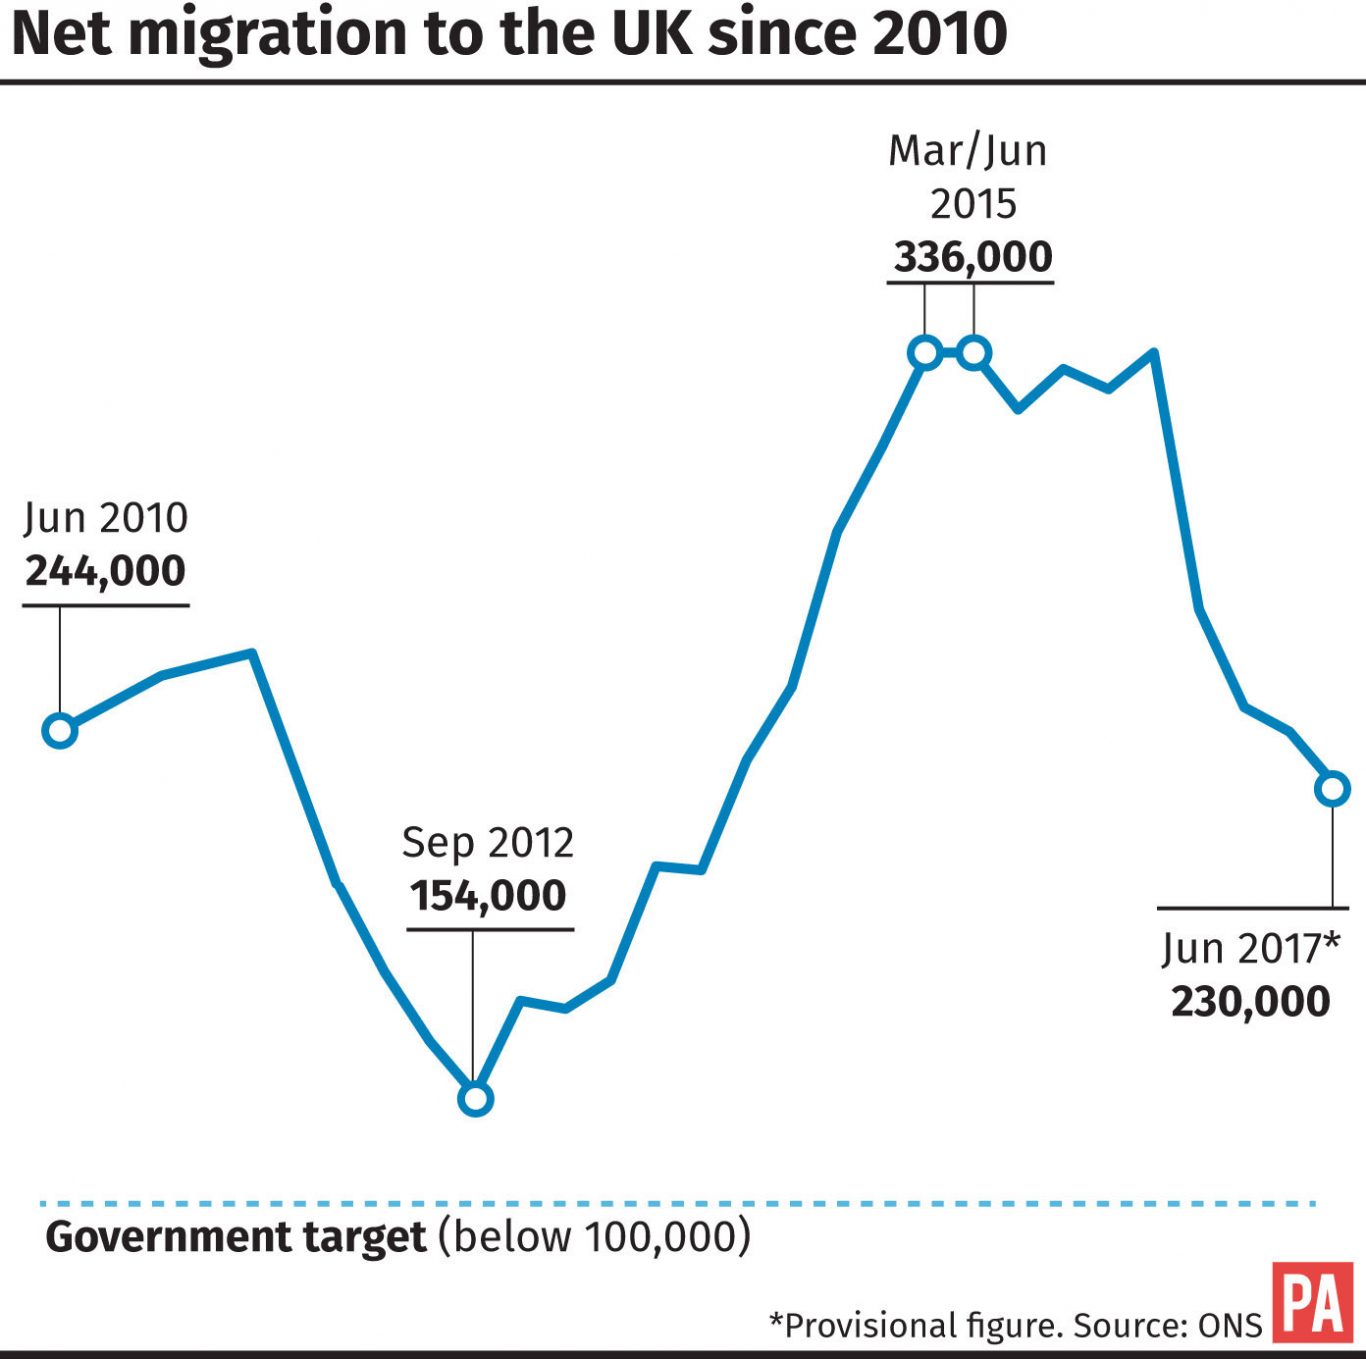 Net migration to the UK since 2010